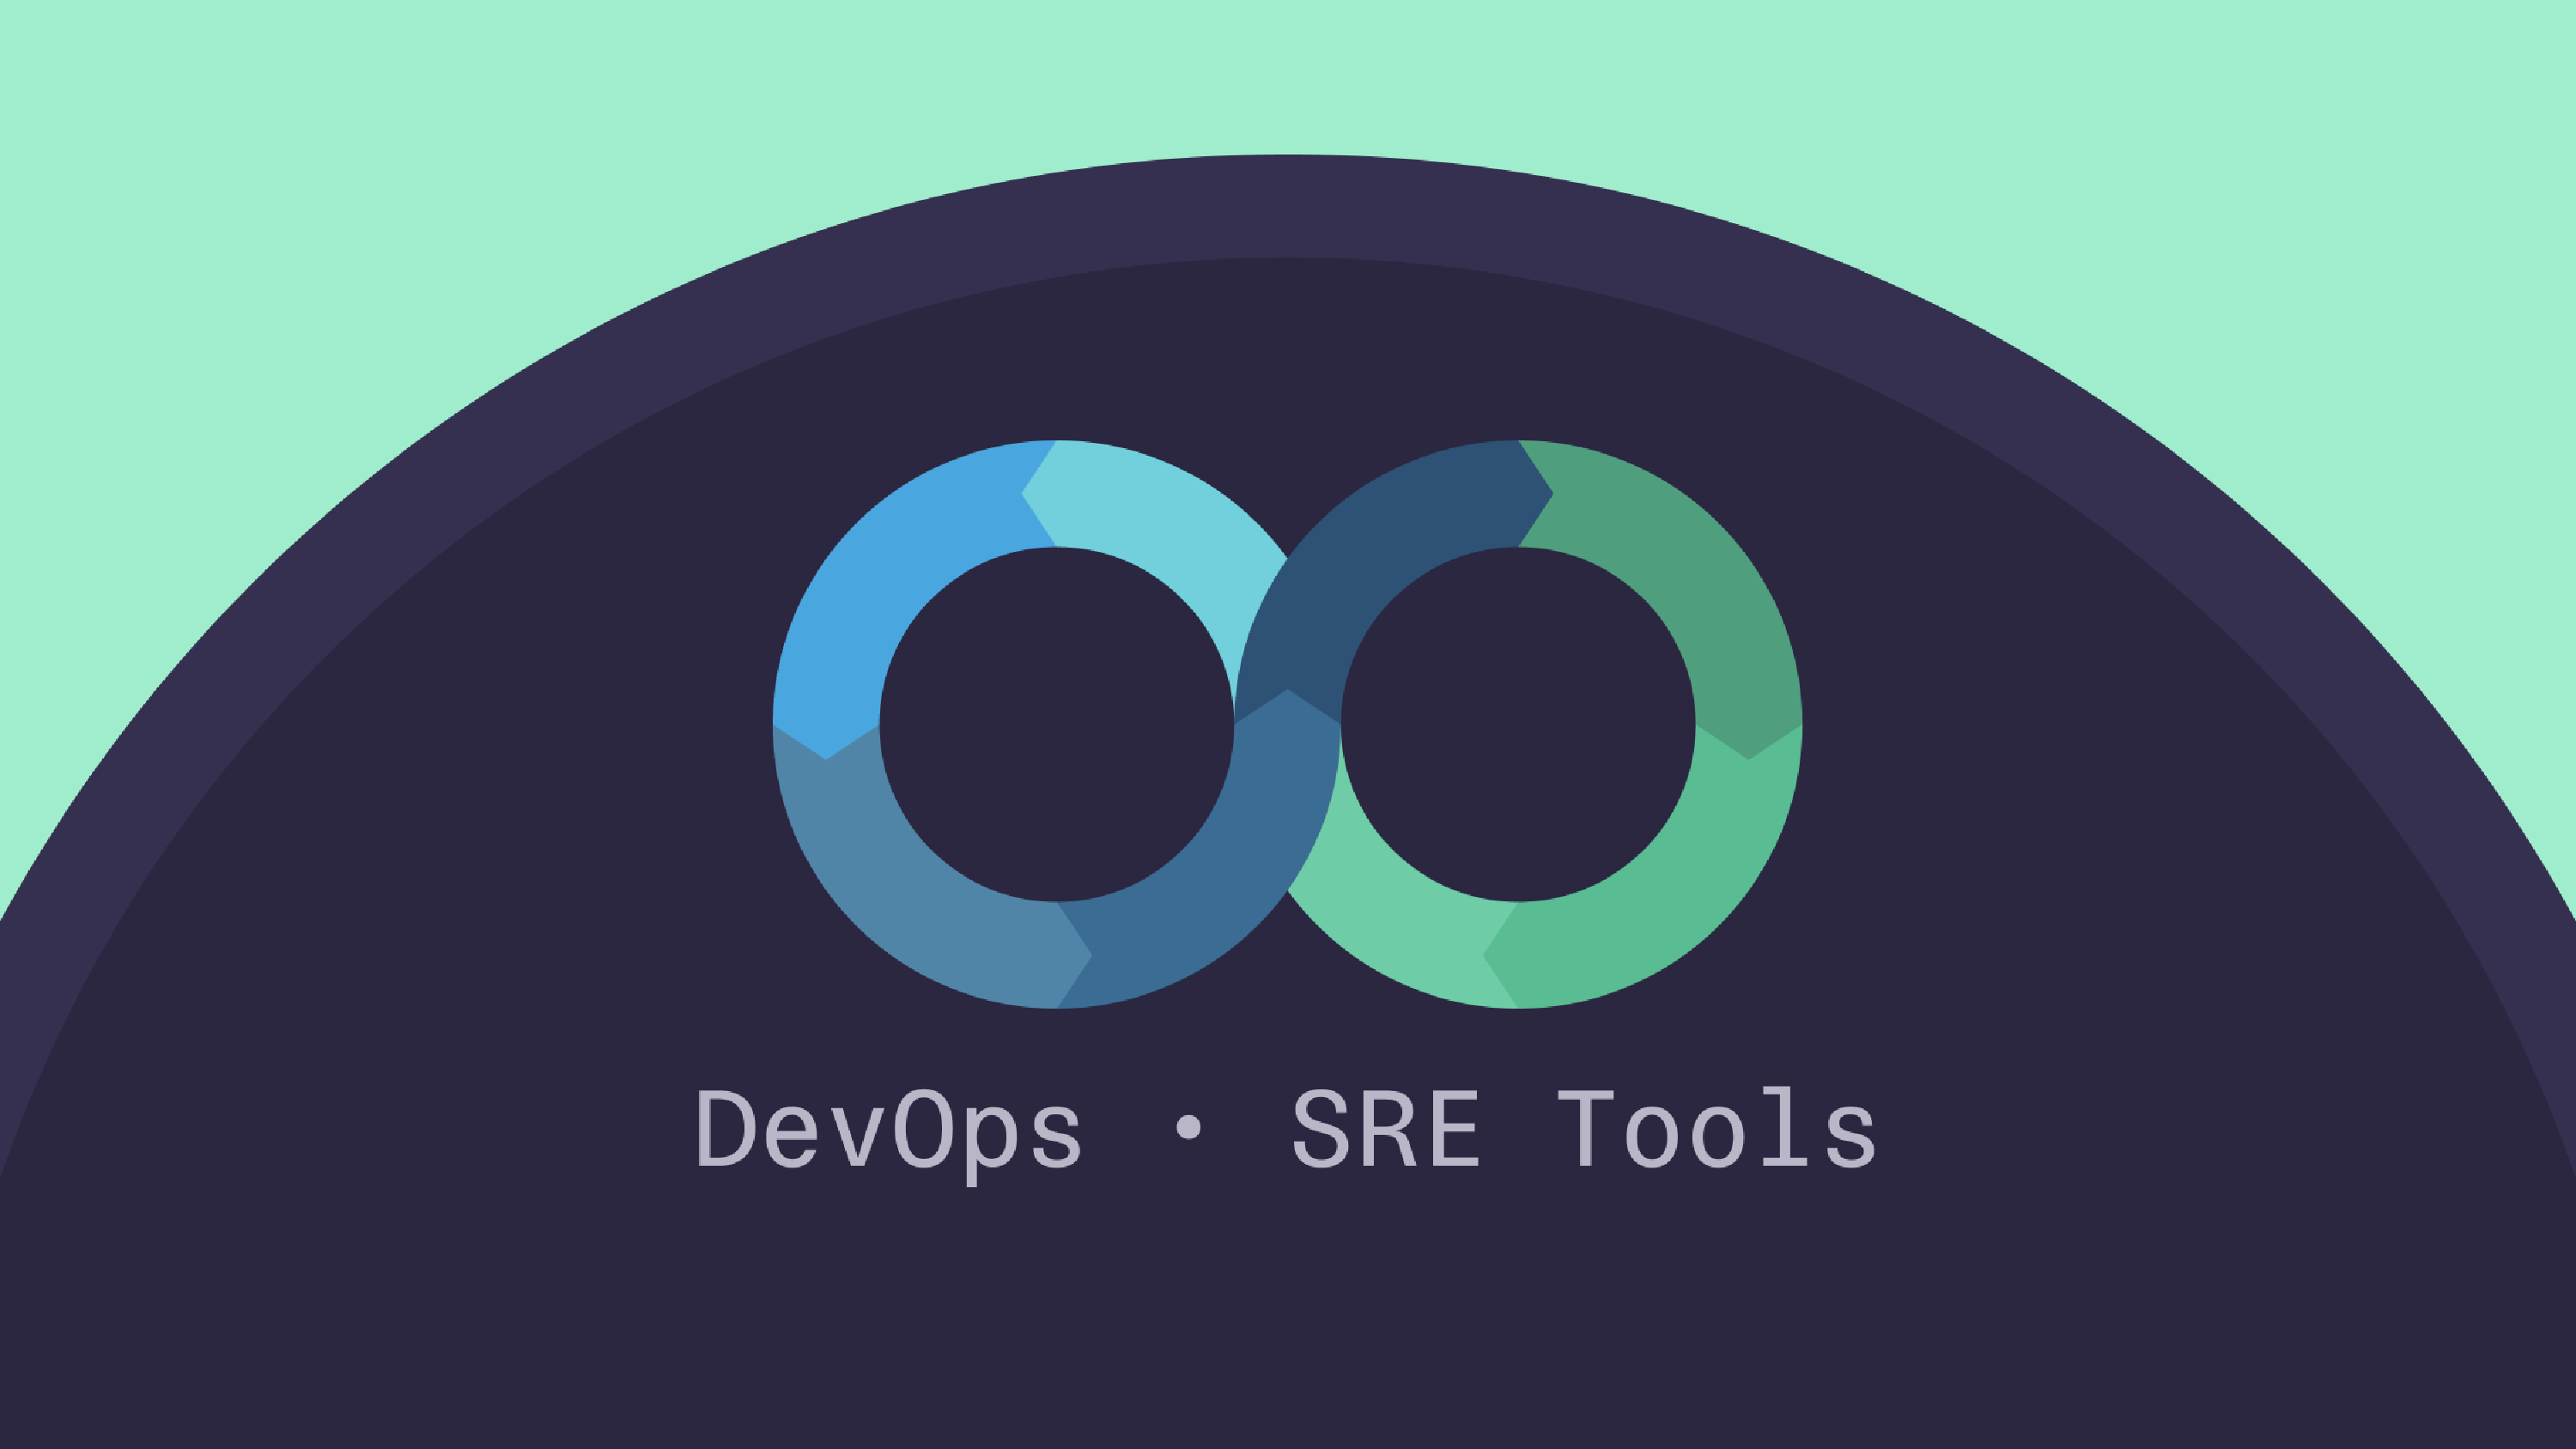 15 DevOps and SRE Tools you Should Know About in 2023